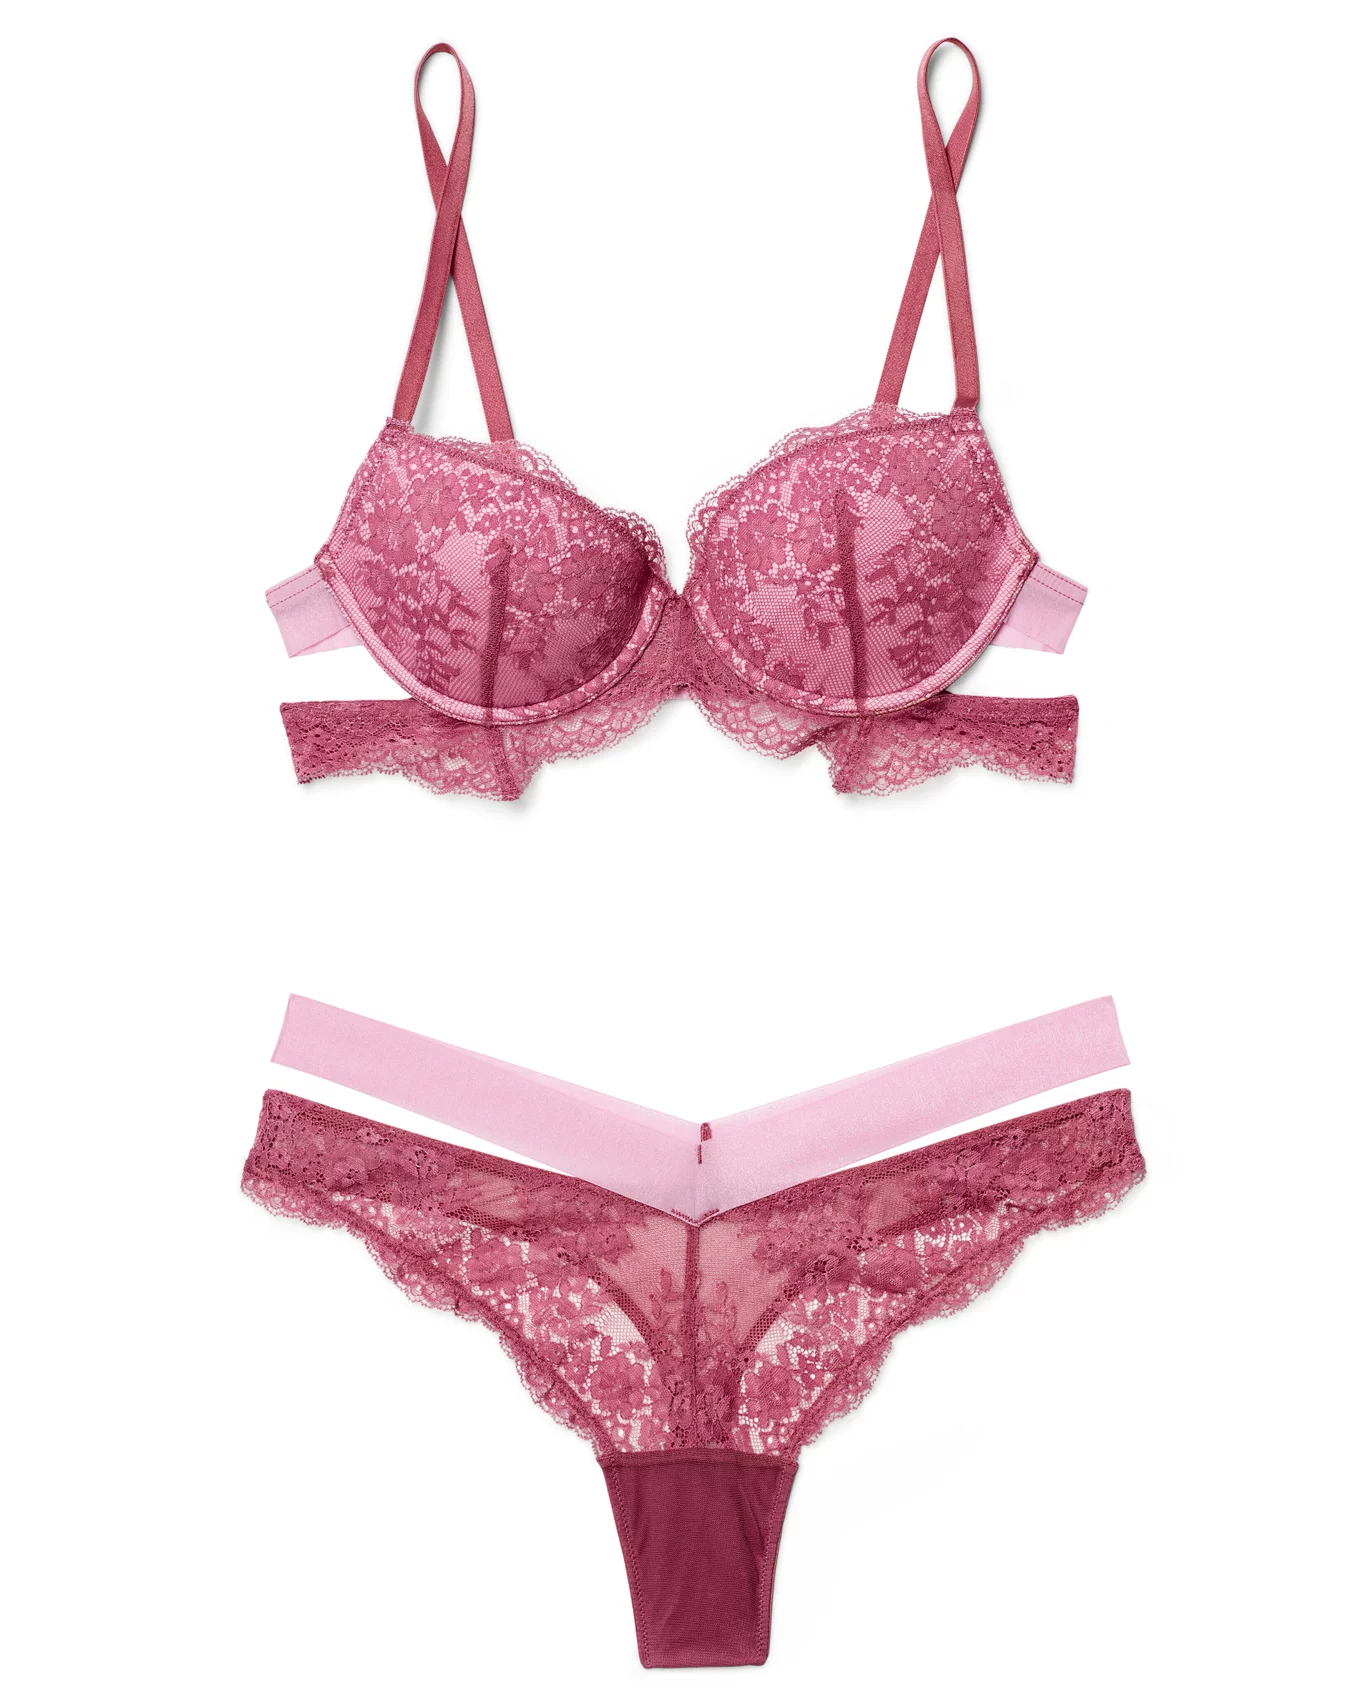 Luxury Lace Push-Up Bra in Lilac Rose